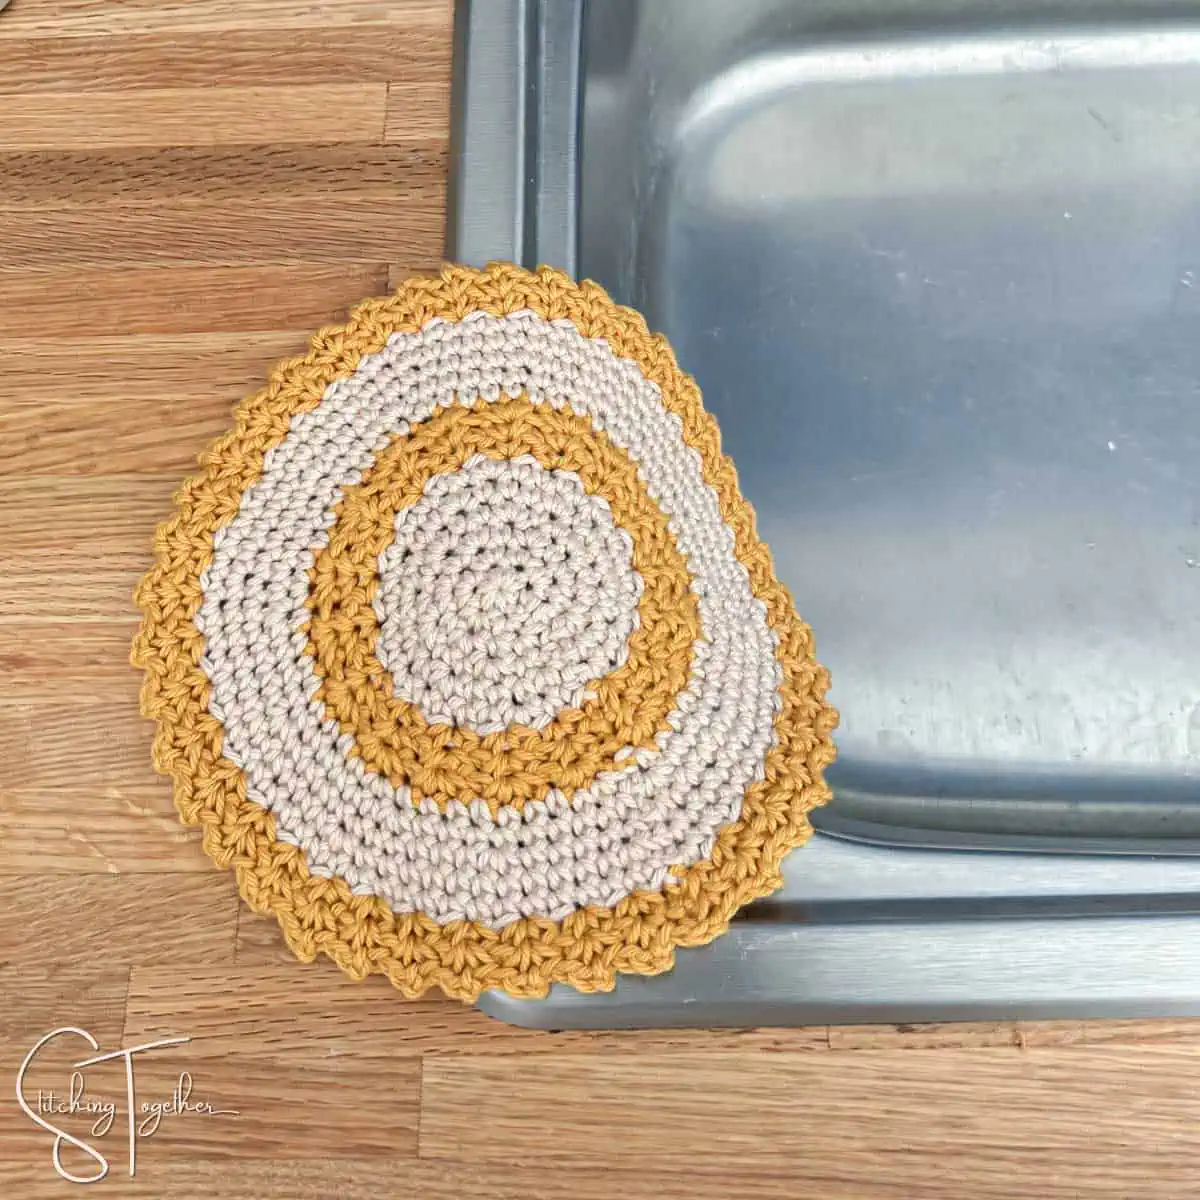 yellow and cream round crochet dishcloth draped on the side of a sink